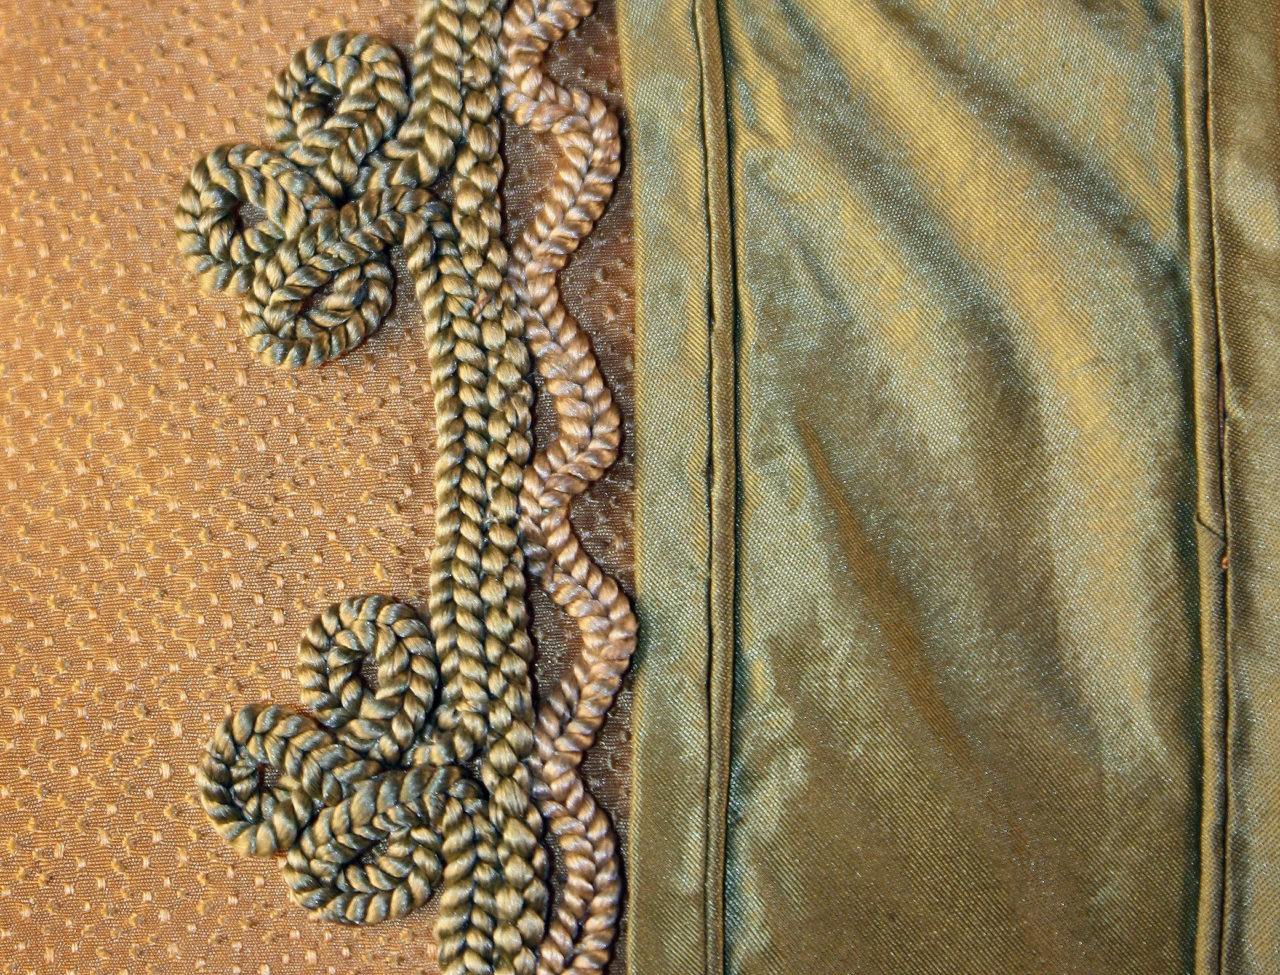 Afternoon dress (detail)